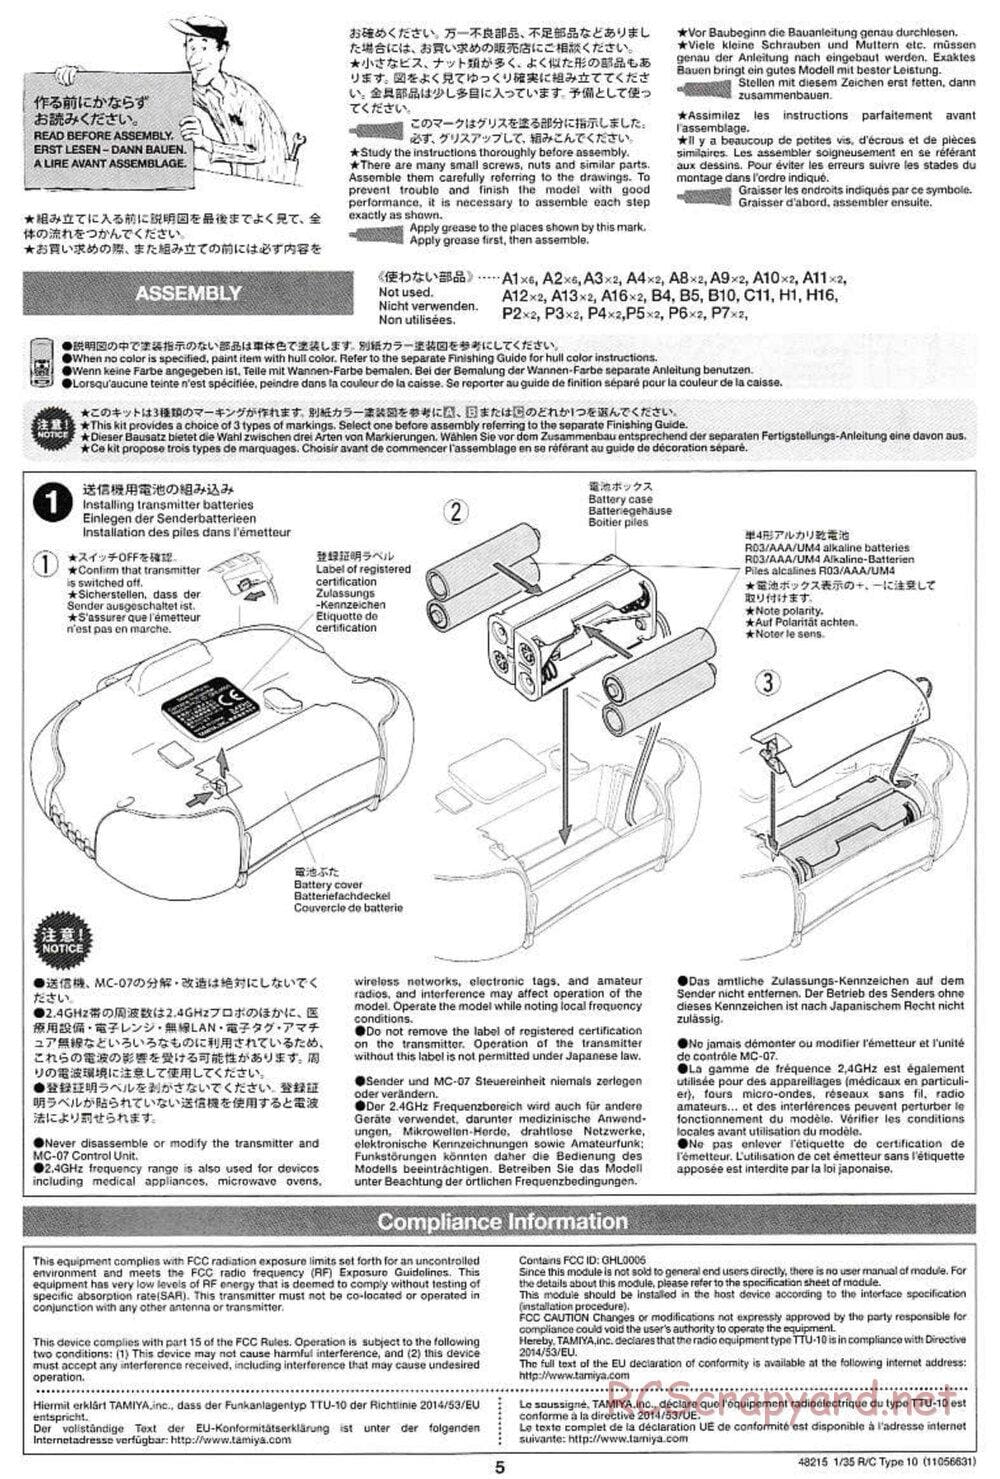 Tamiya - JGSDF Type 10 Tank - 1/35 Scale Chassis - Manual - Page 5